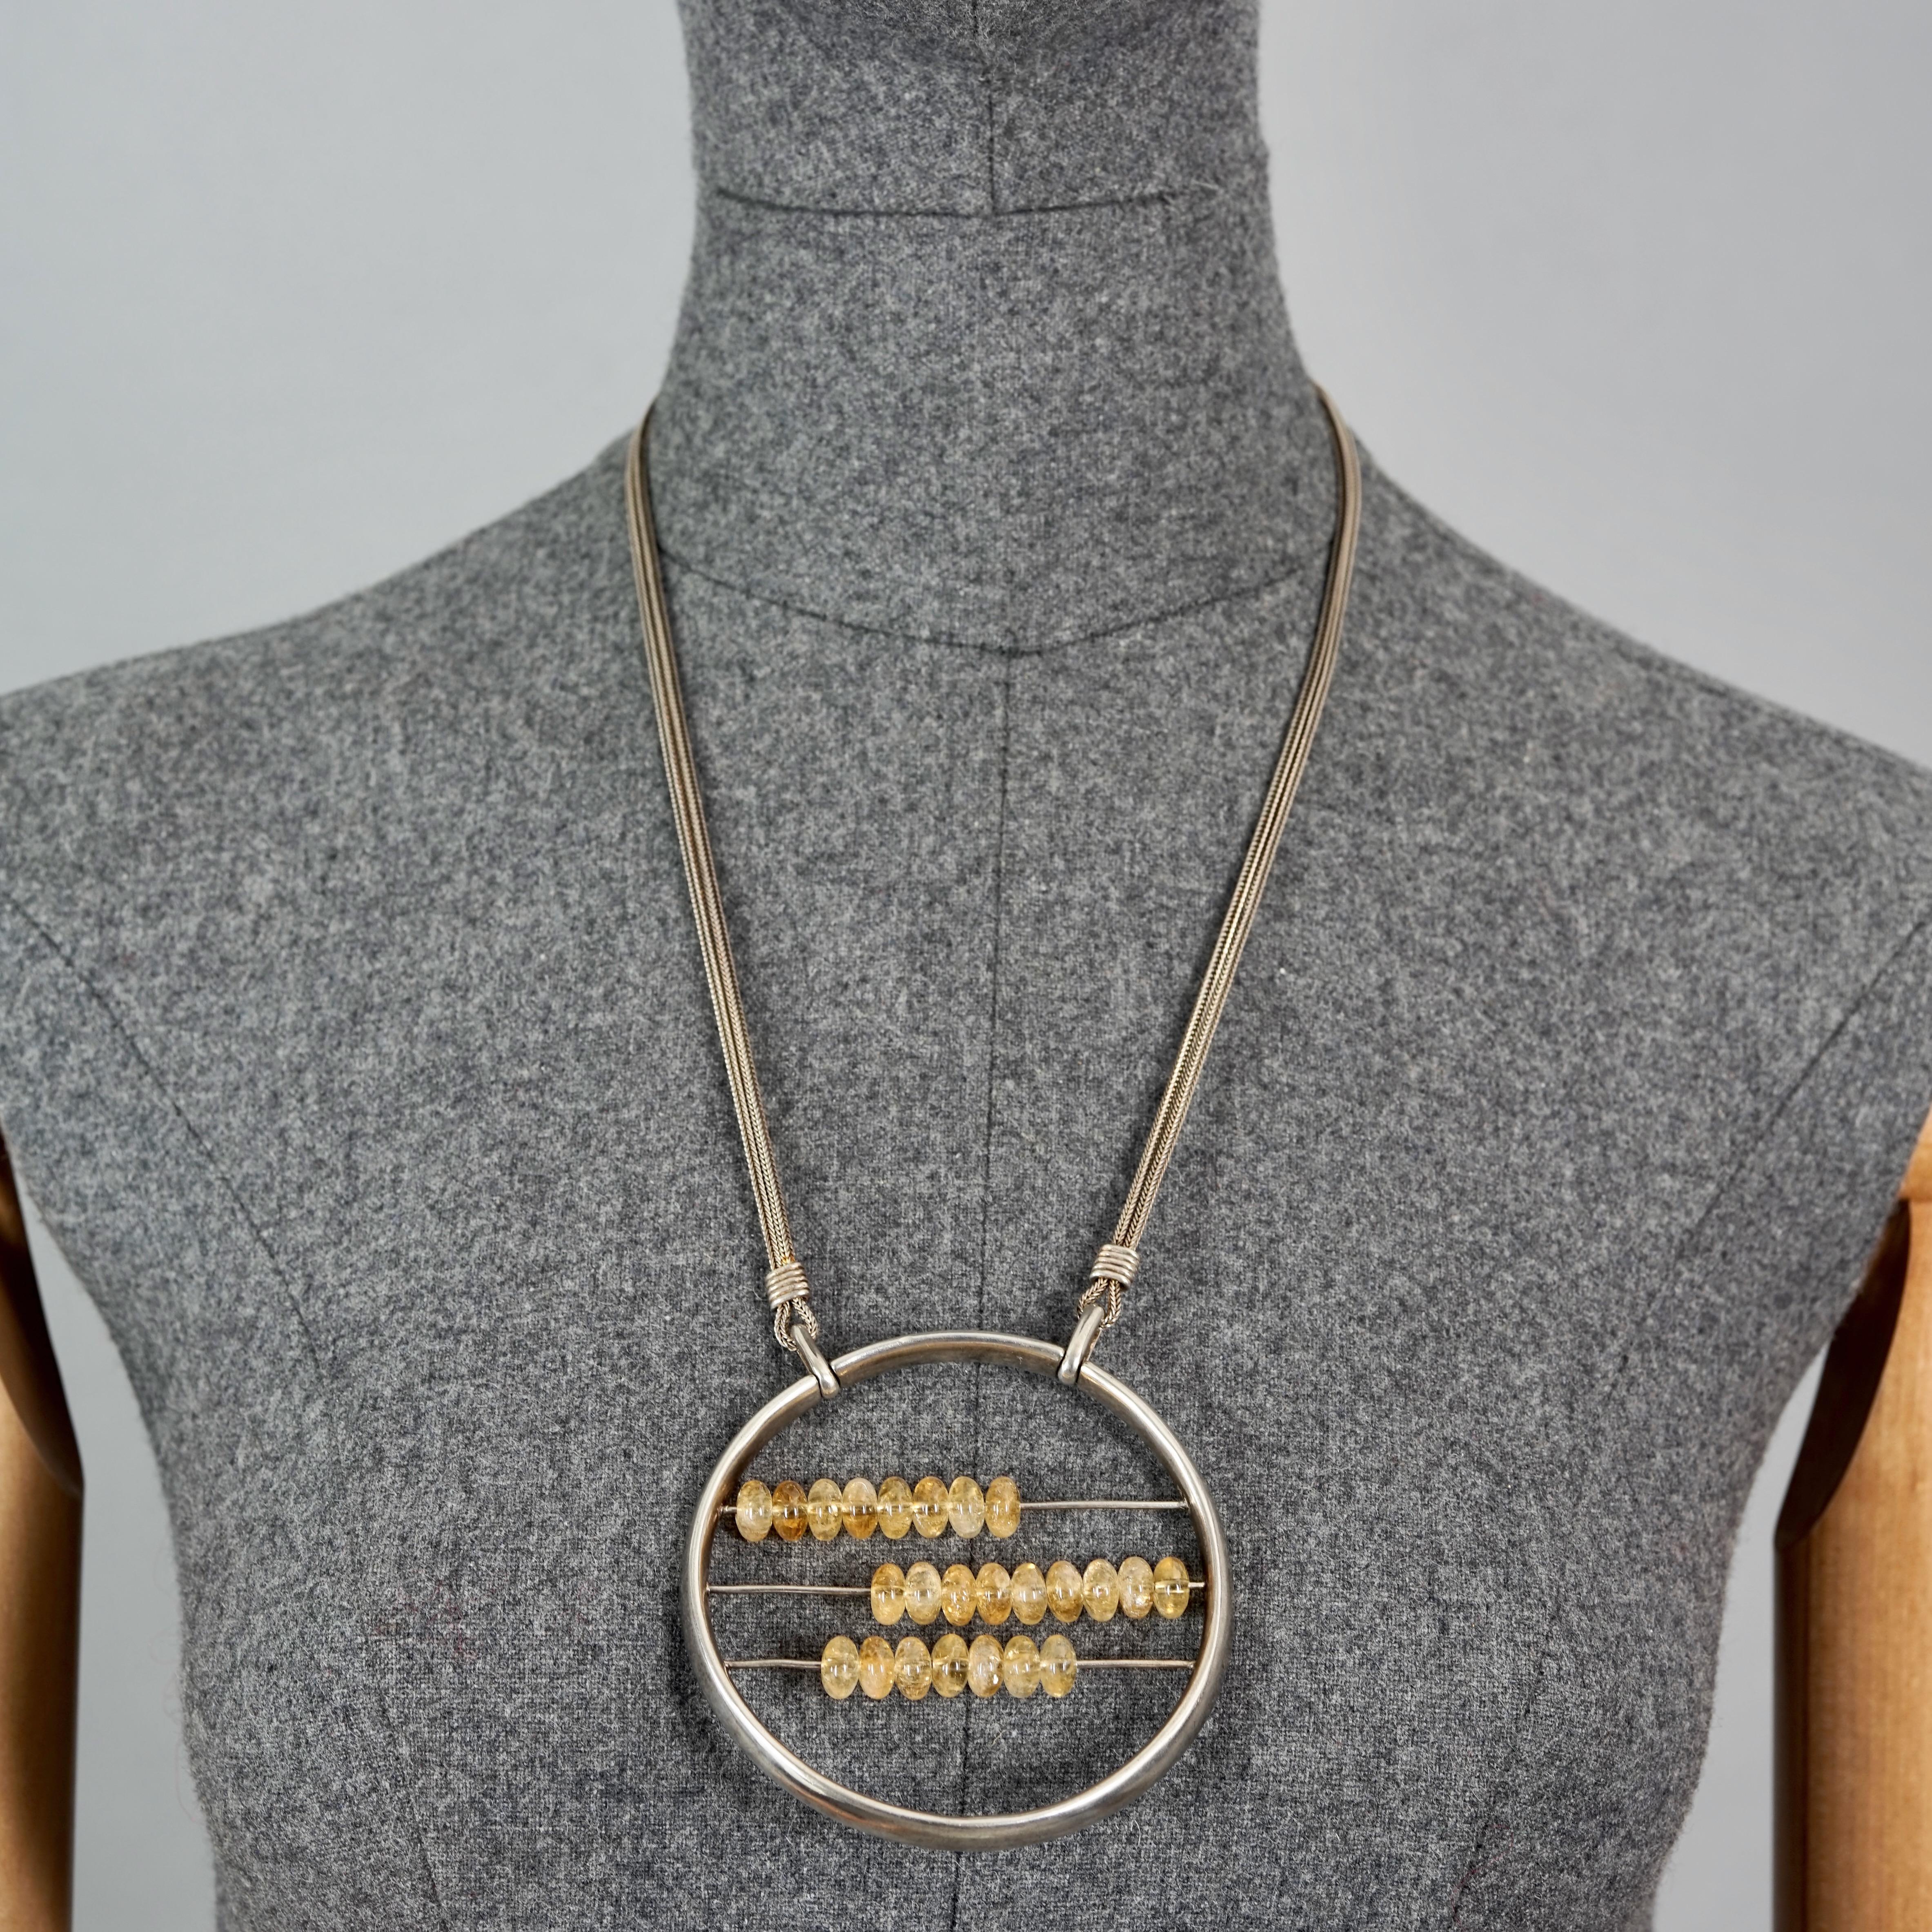 Vintage JEAN PAUL GAULTIER Abacus Medallion Sterling Silver Necklace

Measurements:
Height: 3.15 inches (8 cm)
Width: 3.15 inches (8 cm)
Wearable Length: 23.03 inches to 24.40 inches (58.5 cm to 62 cm) adjustable

Features:
- 100% Authentic JEAN